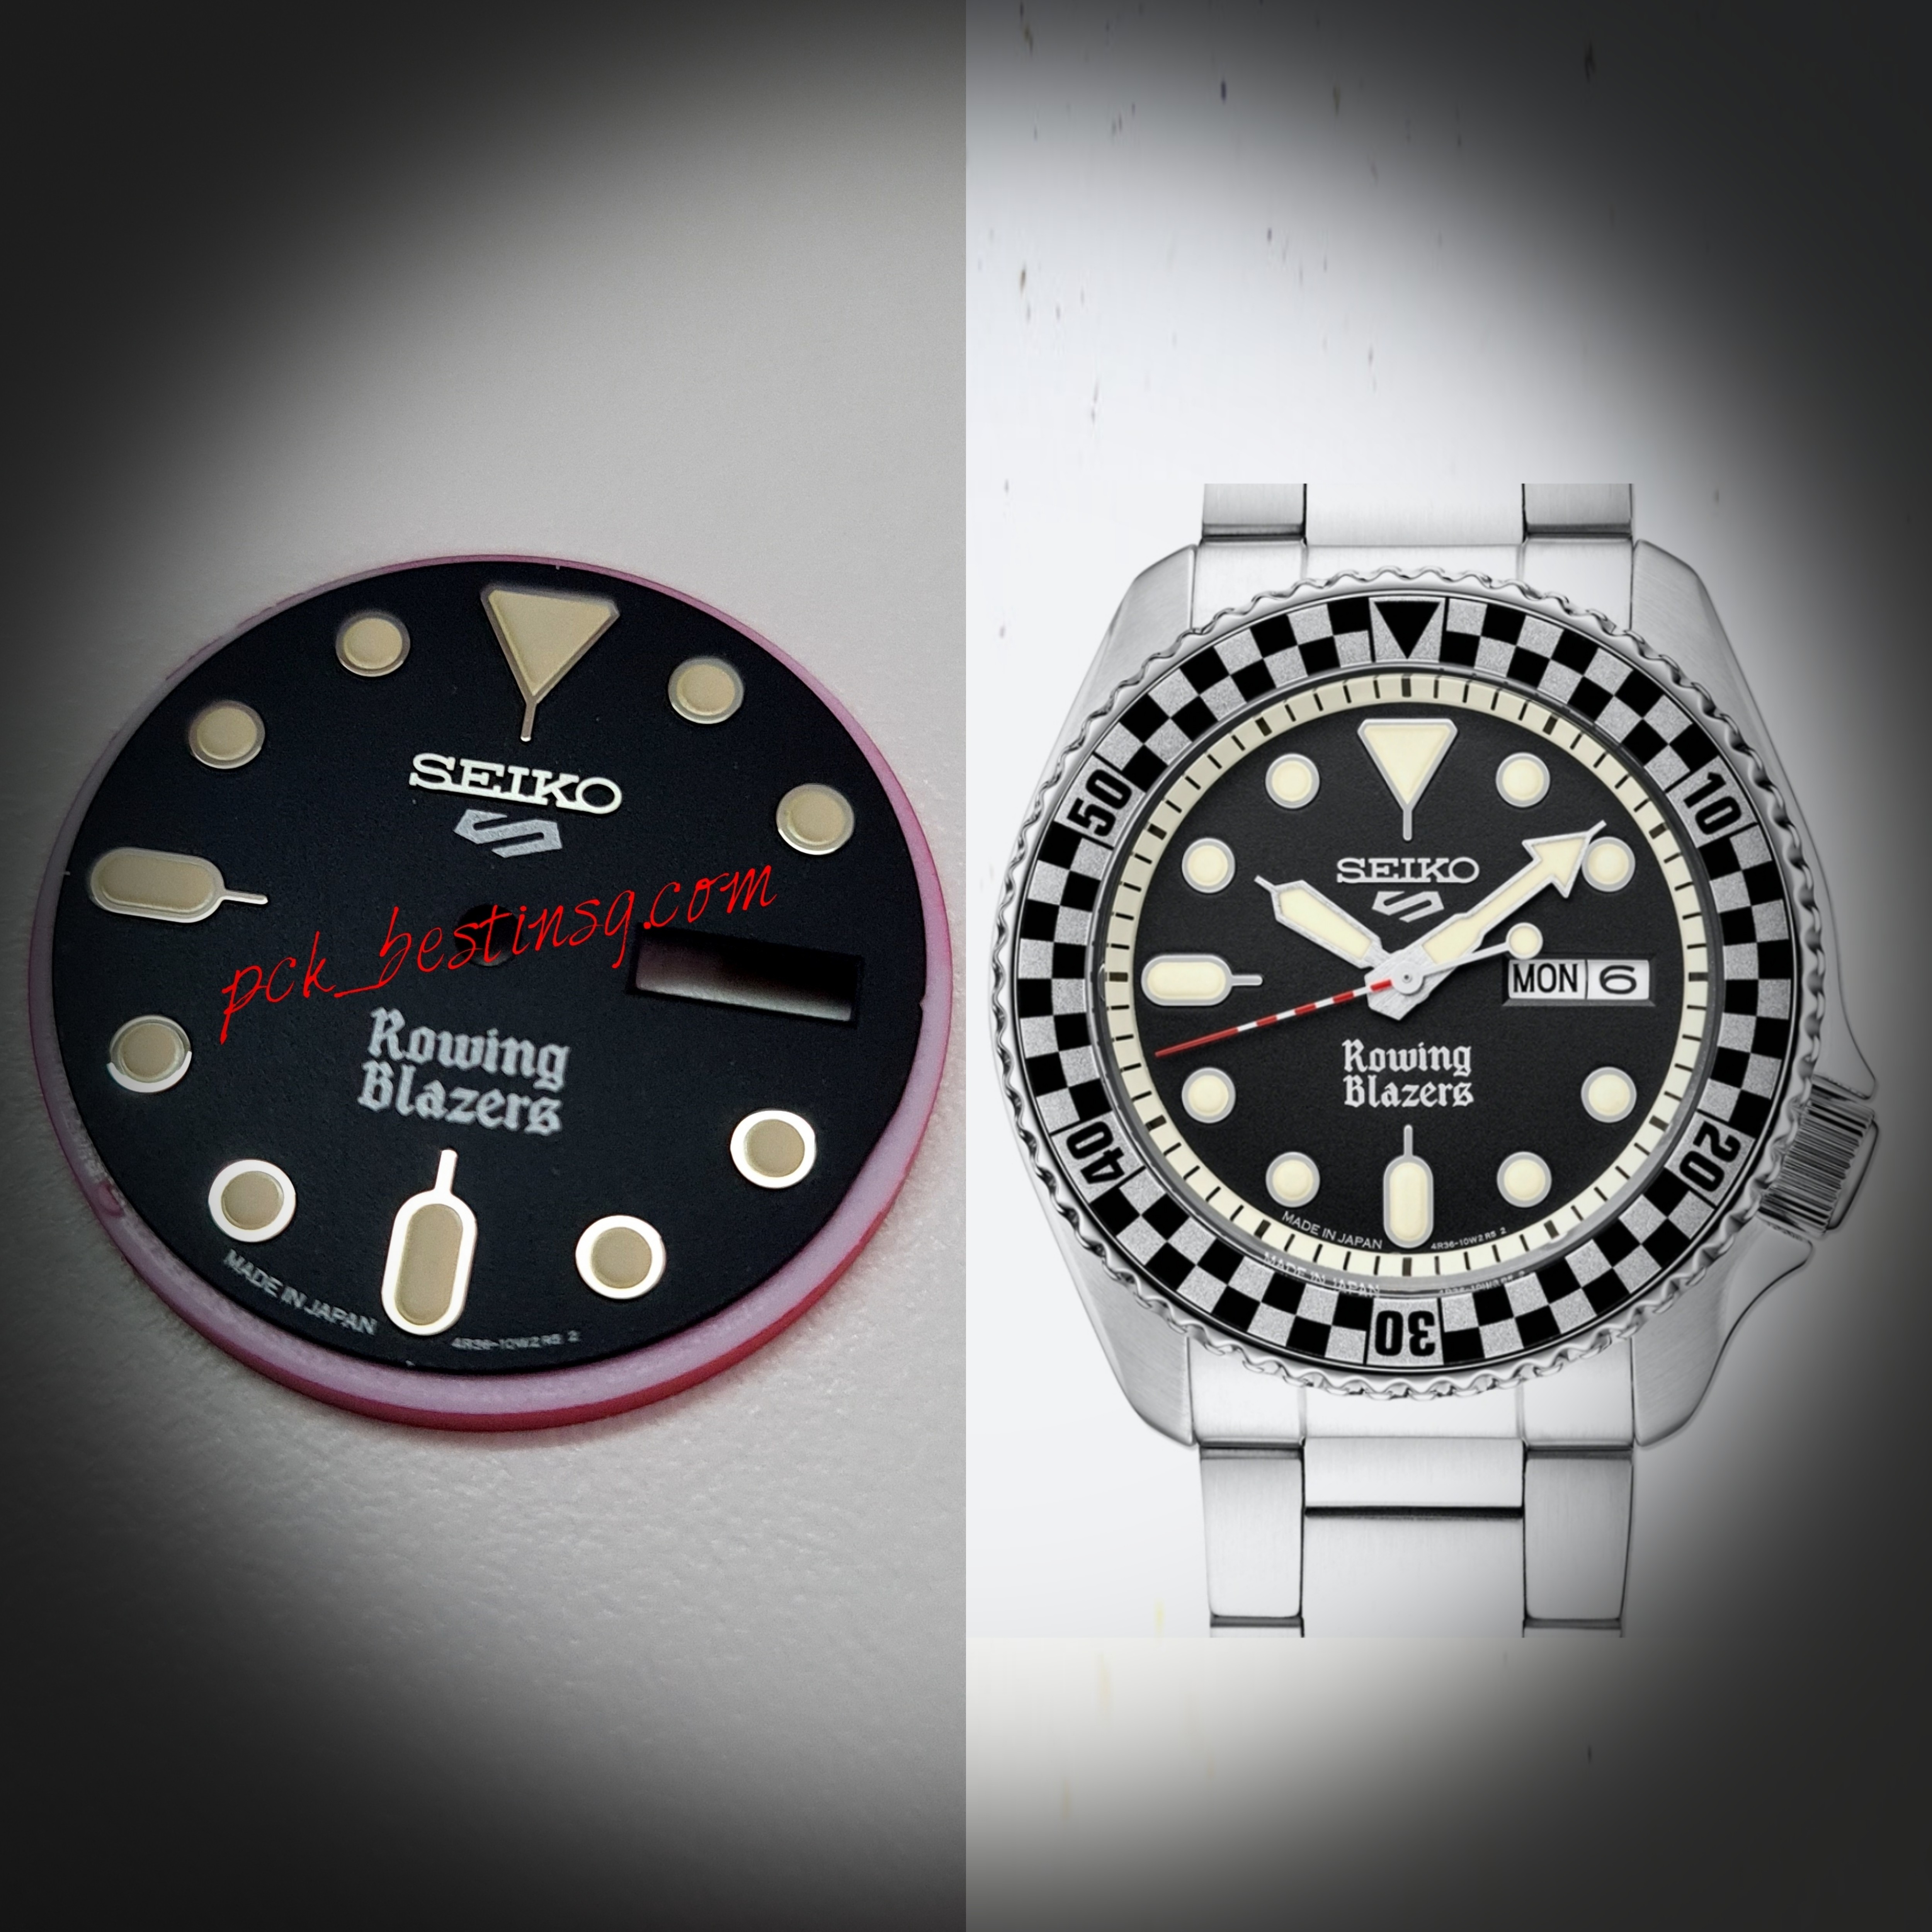 Star Buy 100% Authentic Parts SEIKO 5 X Sport SRPG 49 Rolling Blazers  Limited Edition Dial .100% ORIGINAL SEIKO PARTS . Hand sets available sold  separately pm for price. No trade